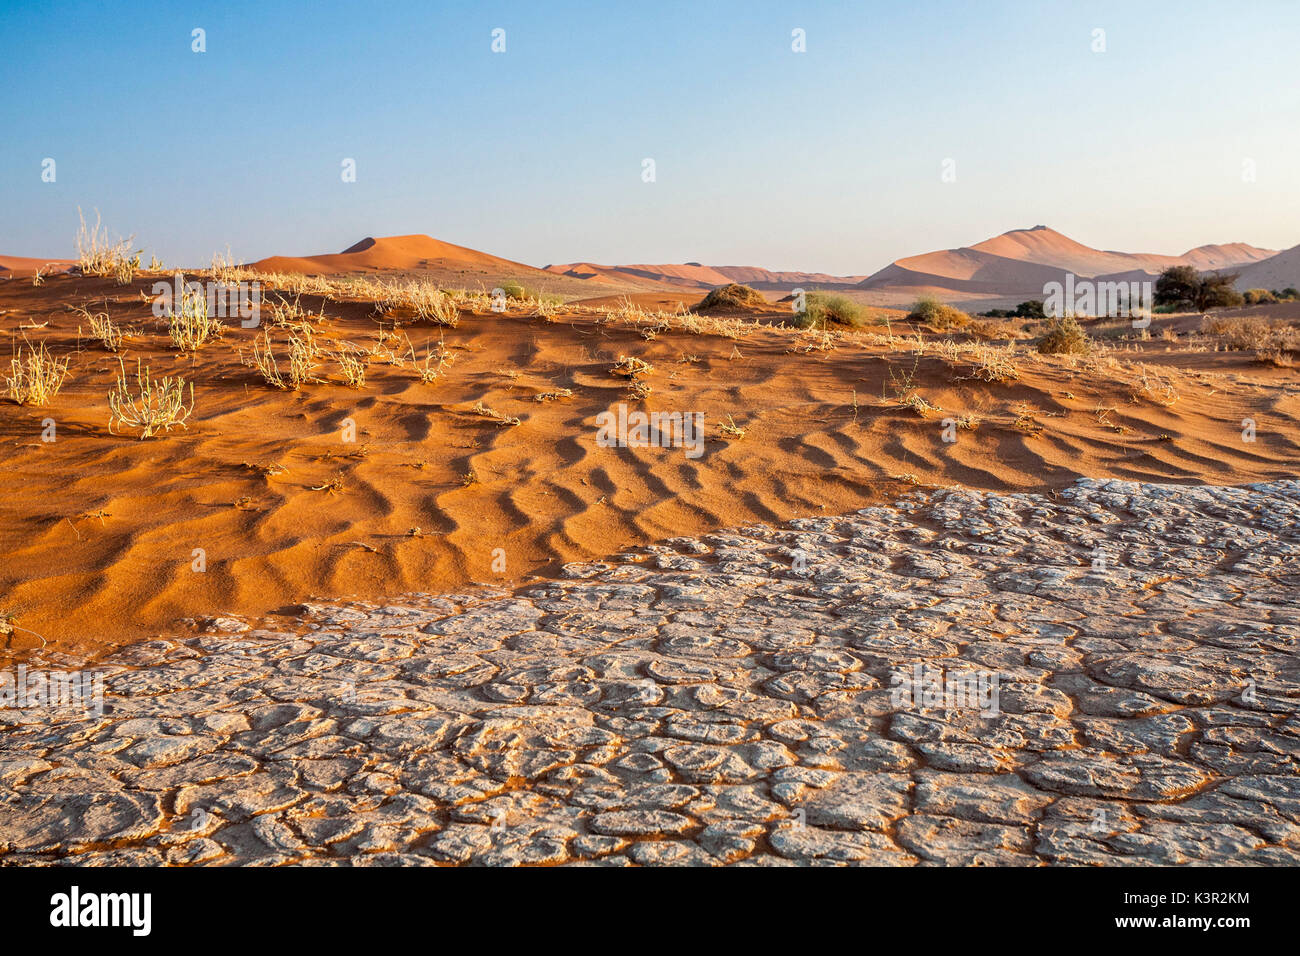 Parched ground and dry plants surrounded by sandy dunes Deadvlei Sossusvlei Namib Desert Naukluft National Park Namibia Africa Stock Photo